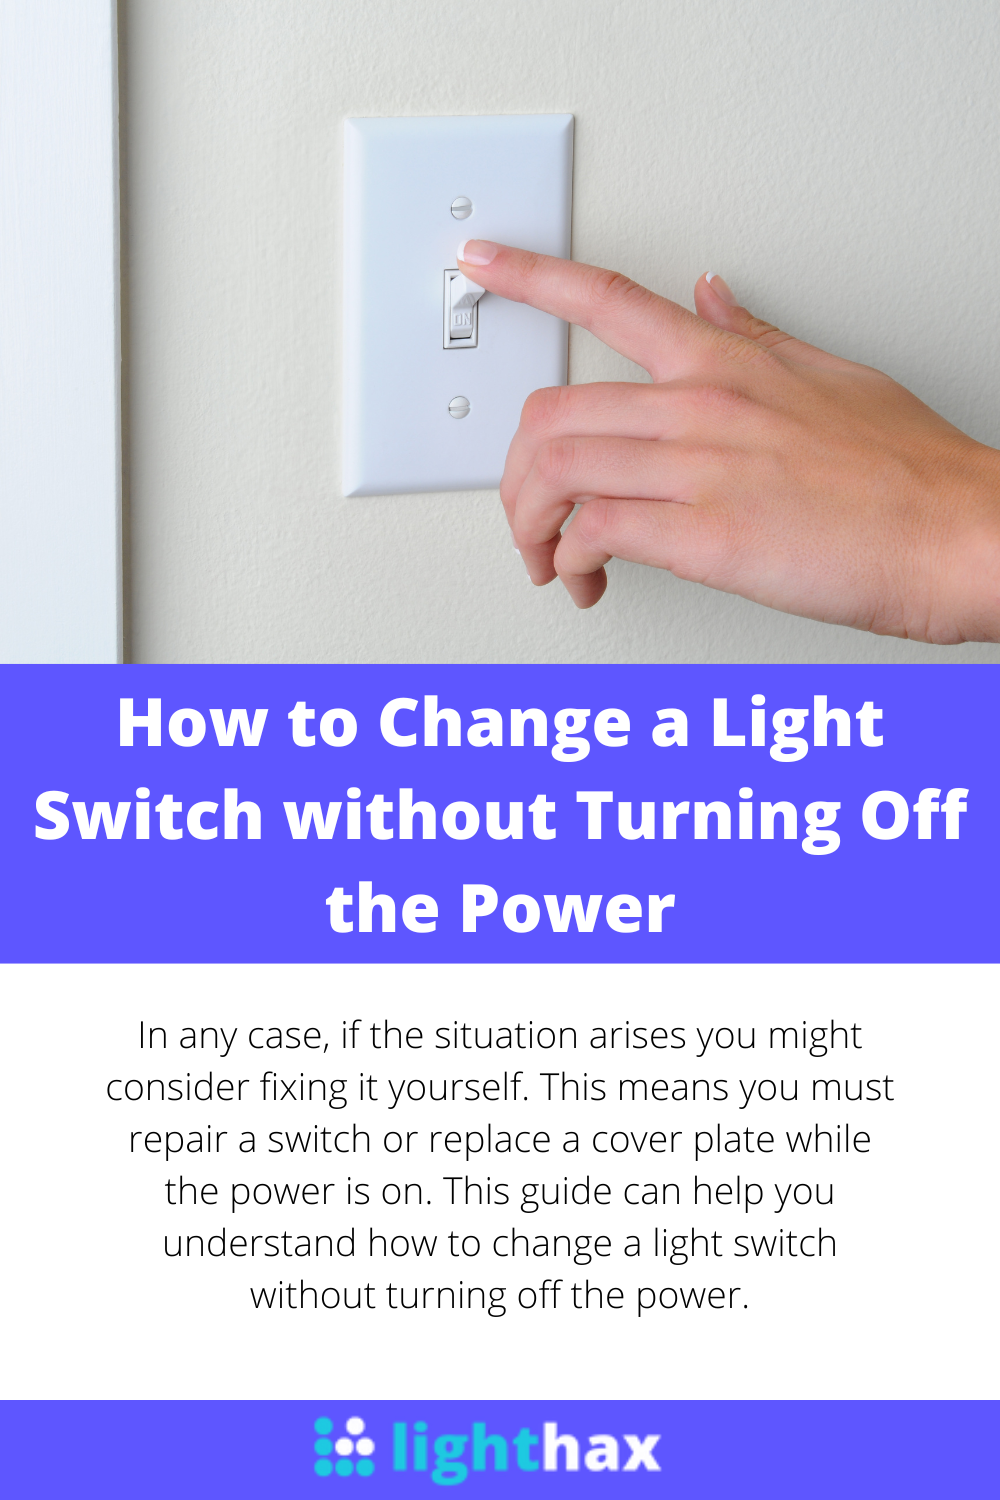 When to Replace Light Swithces